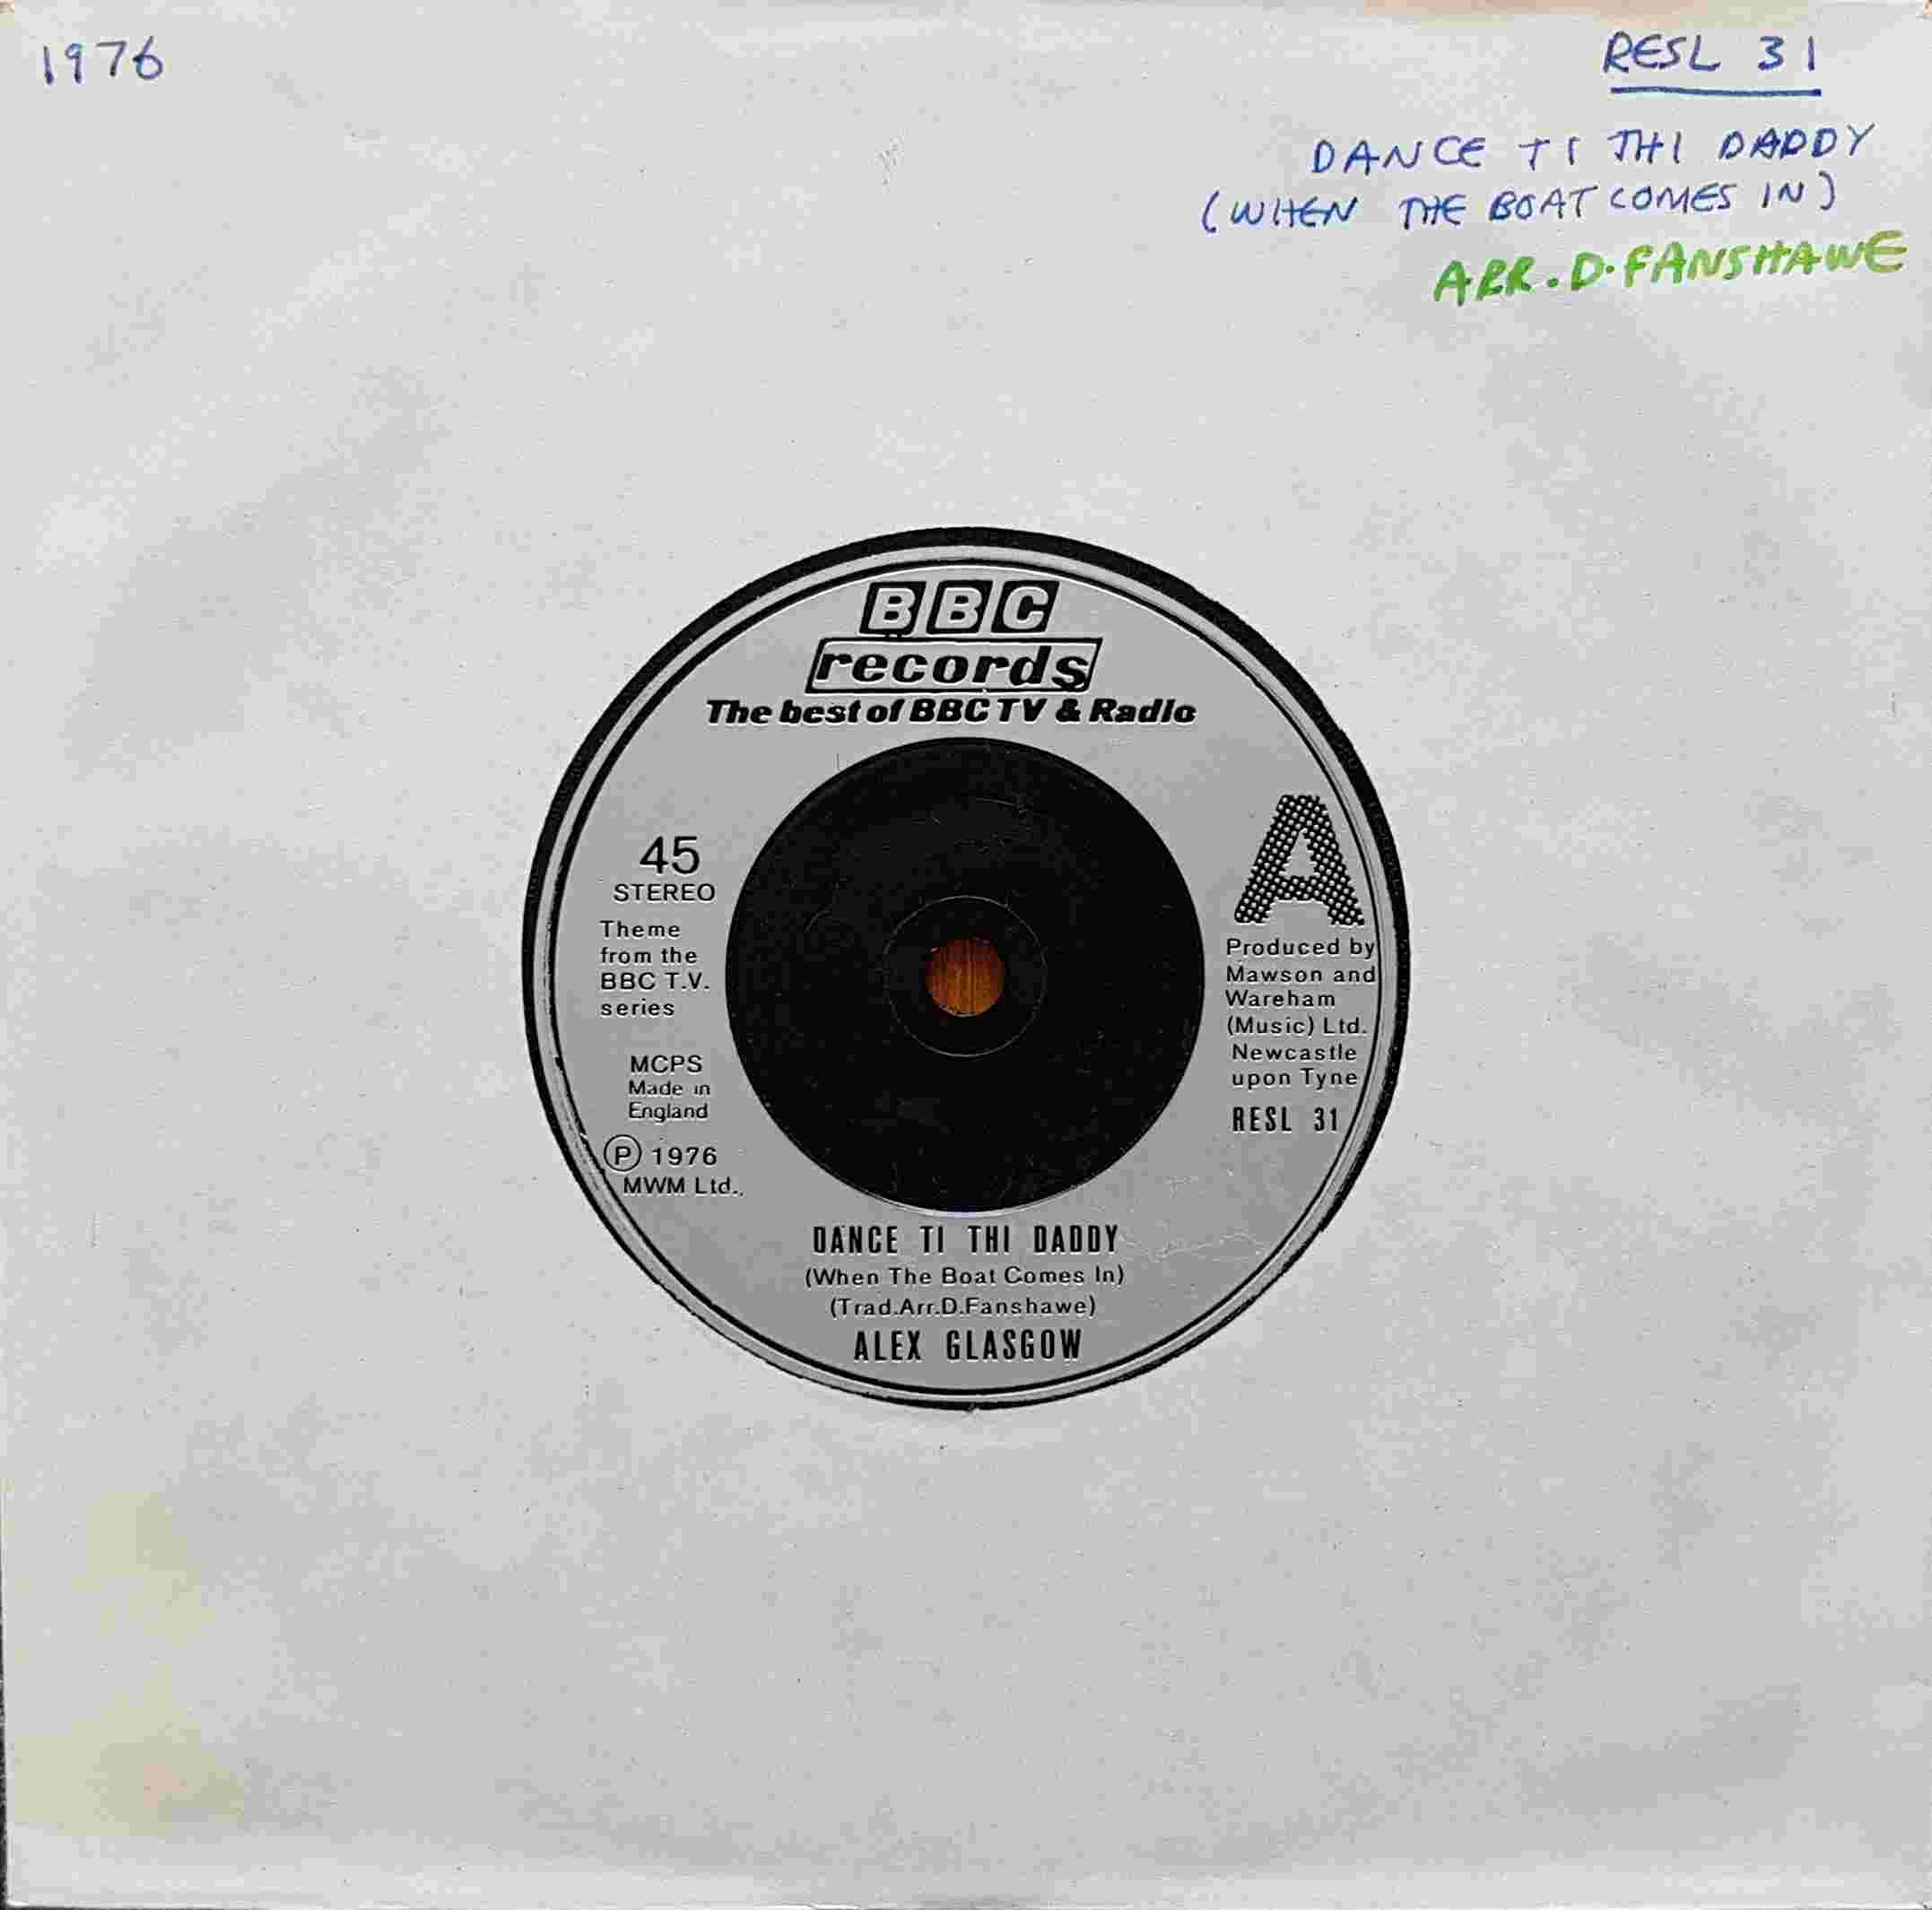 Picture of RESL 31 Dance ti thi daddy (When the boat comes in) by artist Arr. David Fanshawe / Arr. K Statham from the BBC records and Tapes library